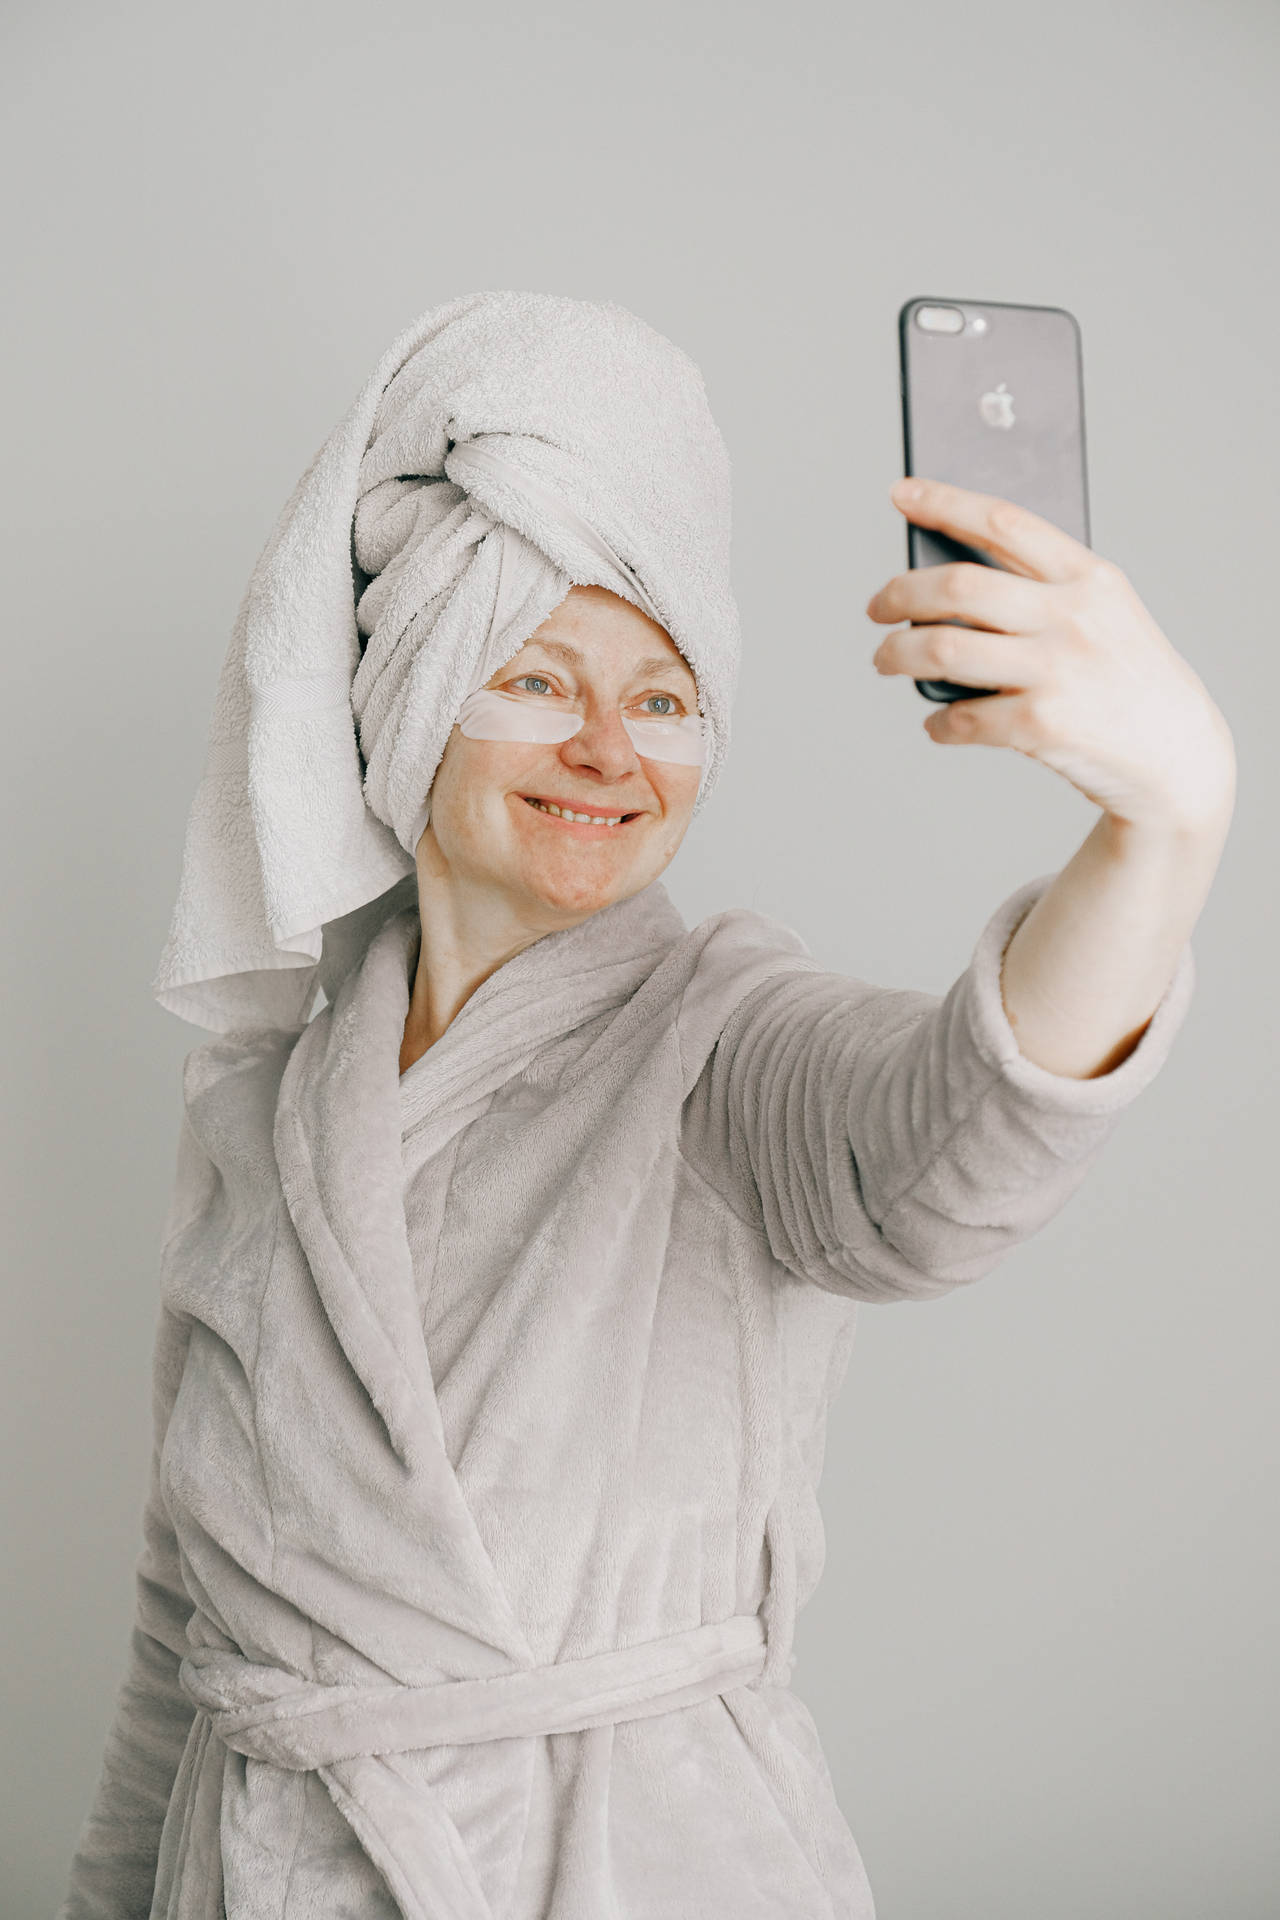 Mesmerizing Beauty Of Iphone After Shower Selfie Background